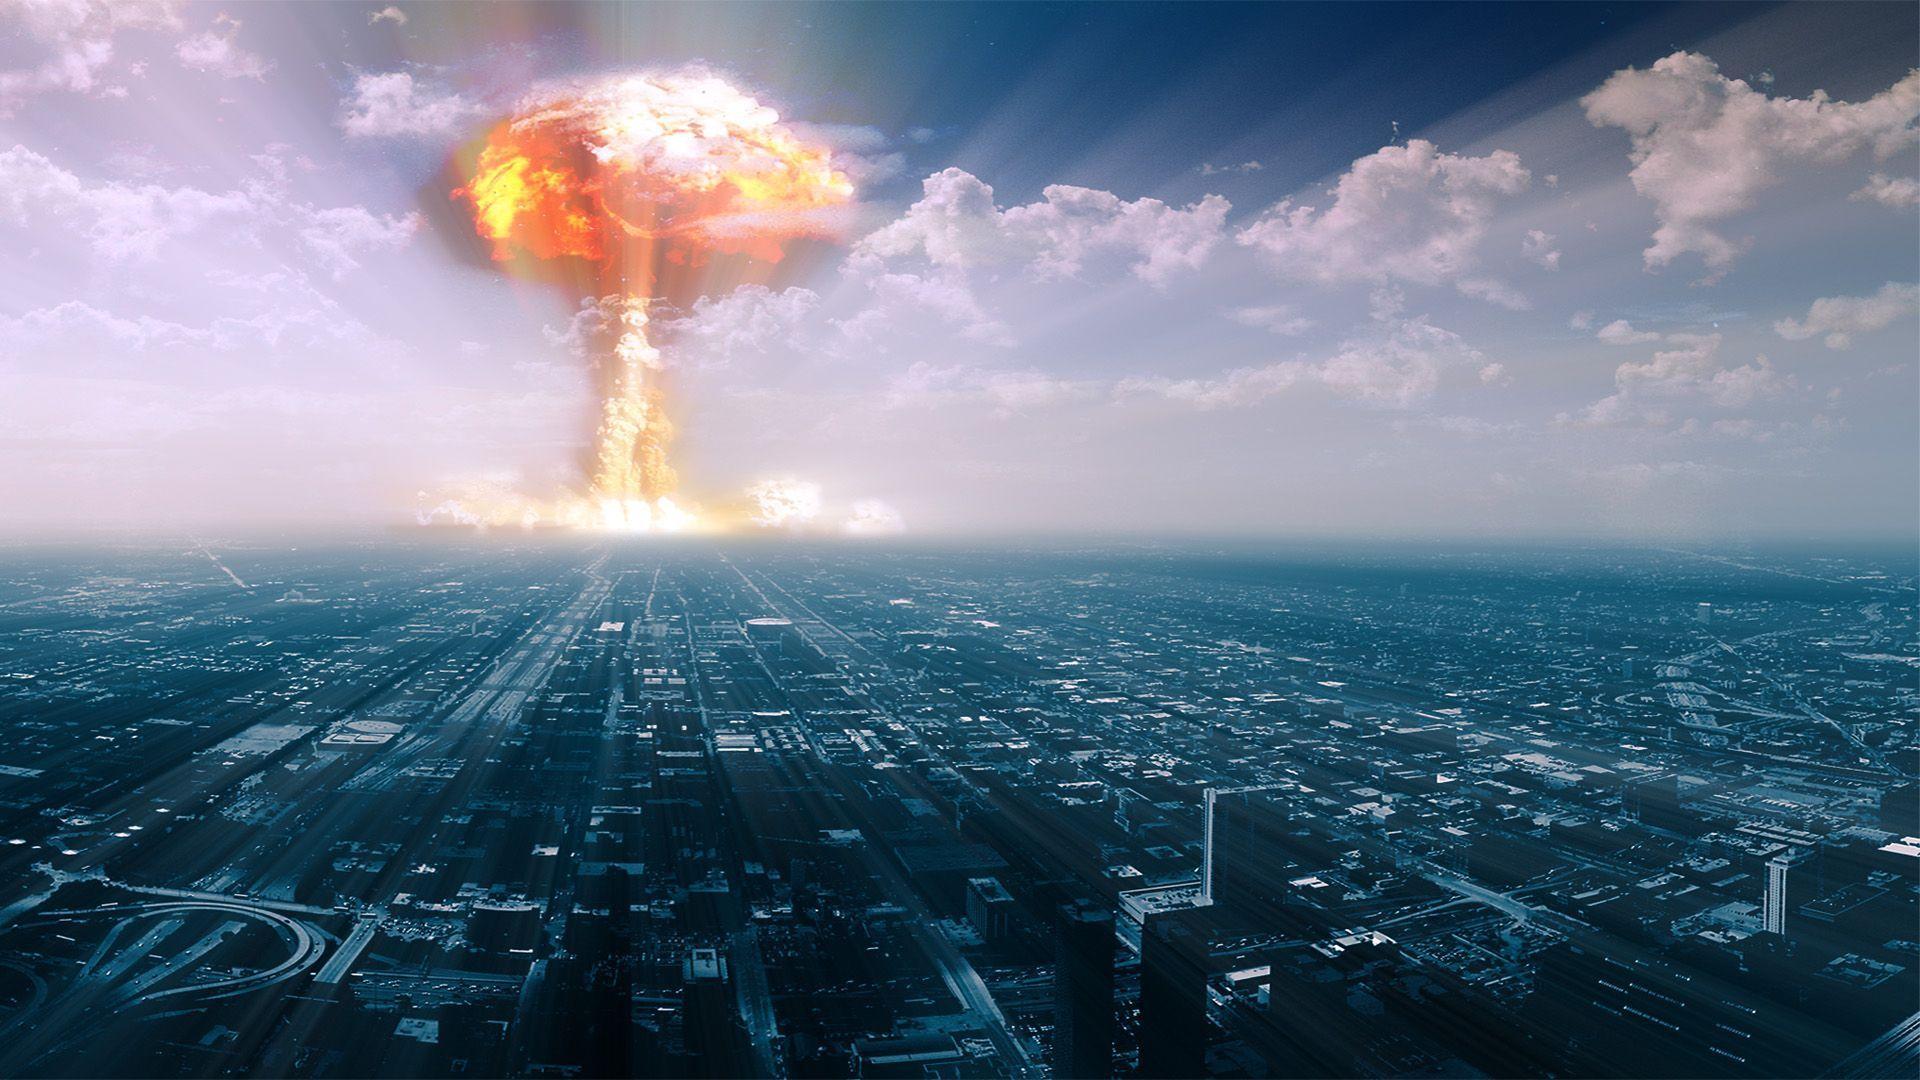 Image For > Nuke Explosion Hd